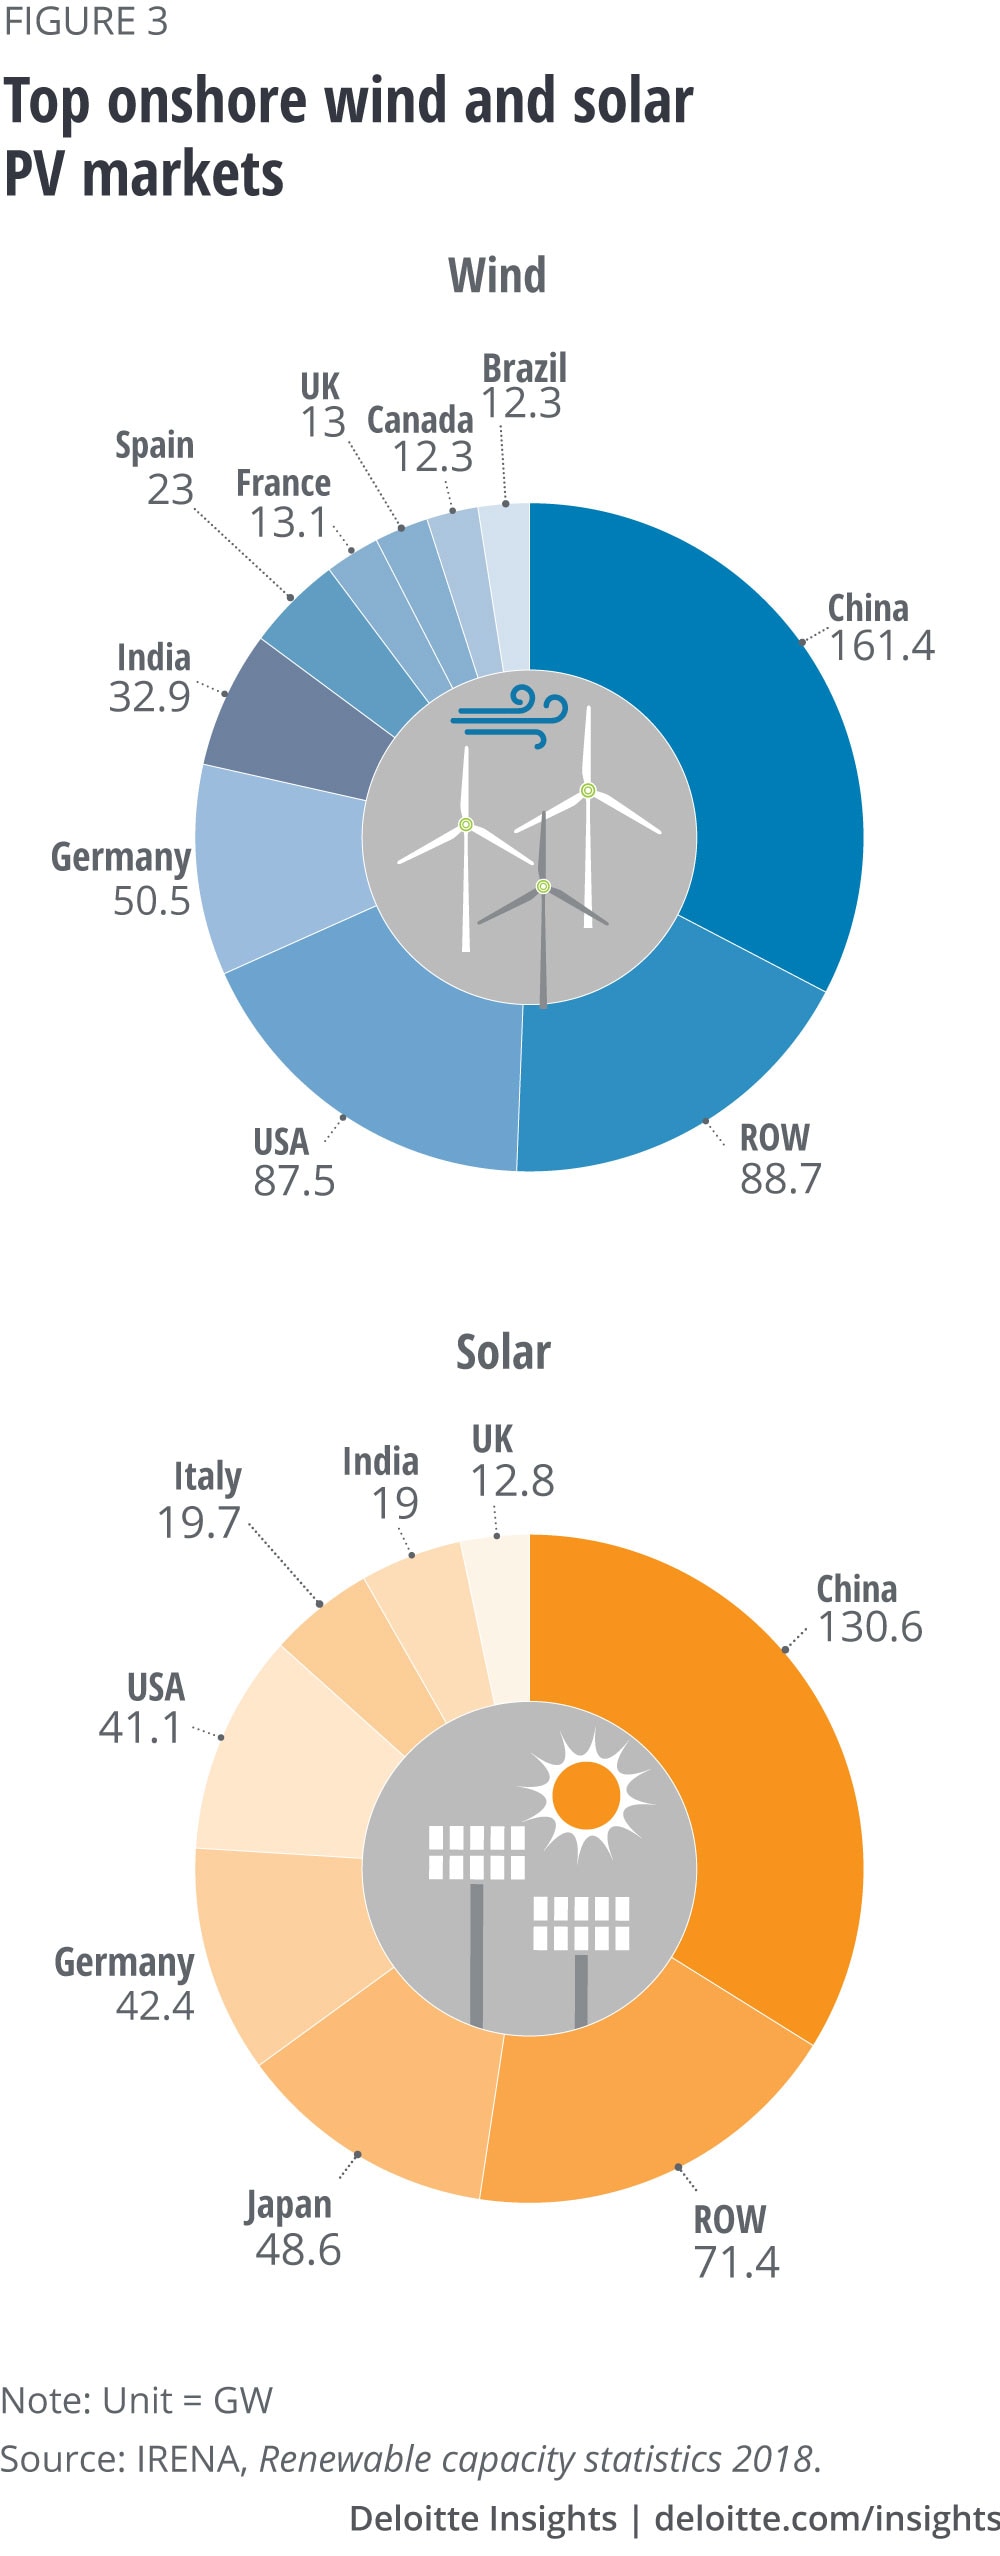 Top onshore wind and solar PV markets